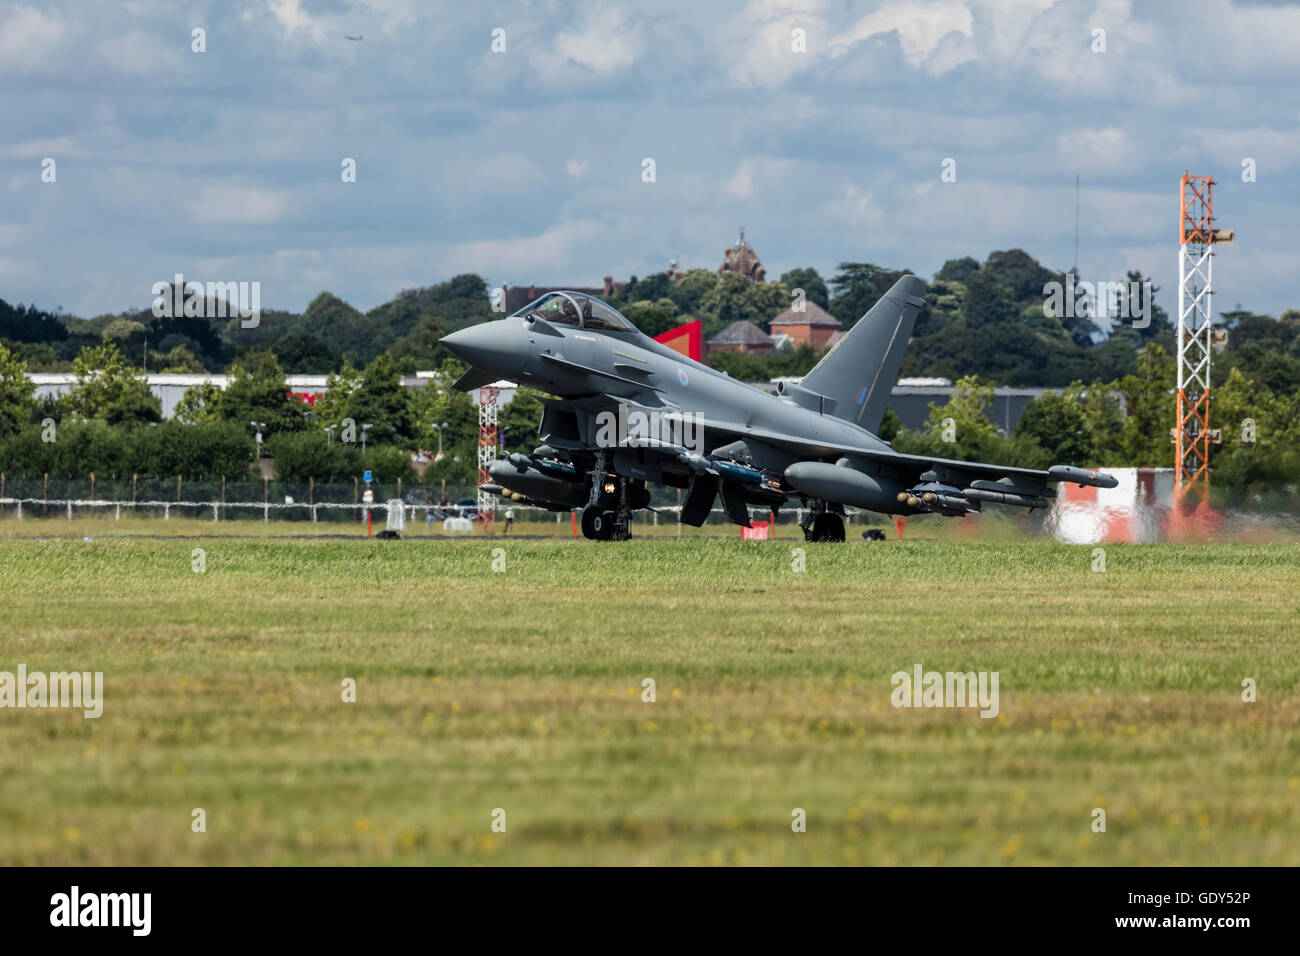 RAF Typhoon Eurofighter jet airplane taking off on the runway at the Farnborough International Air Show in 2016 Stock Photo